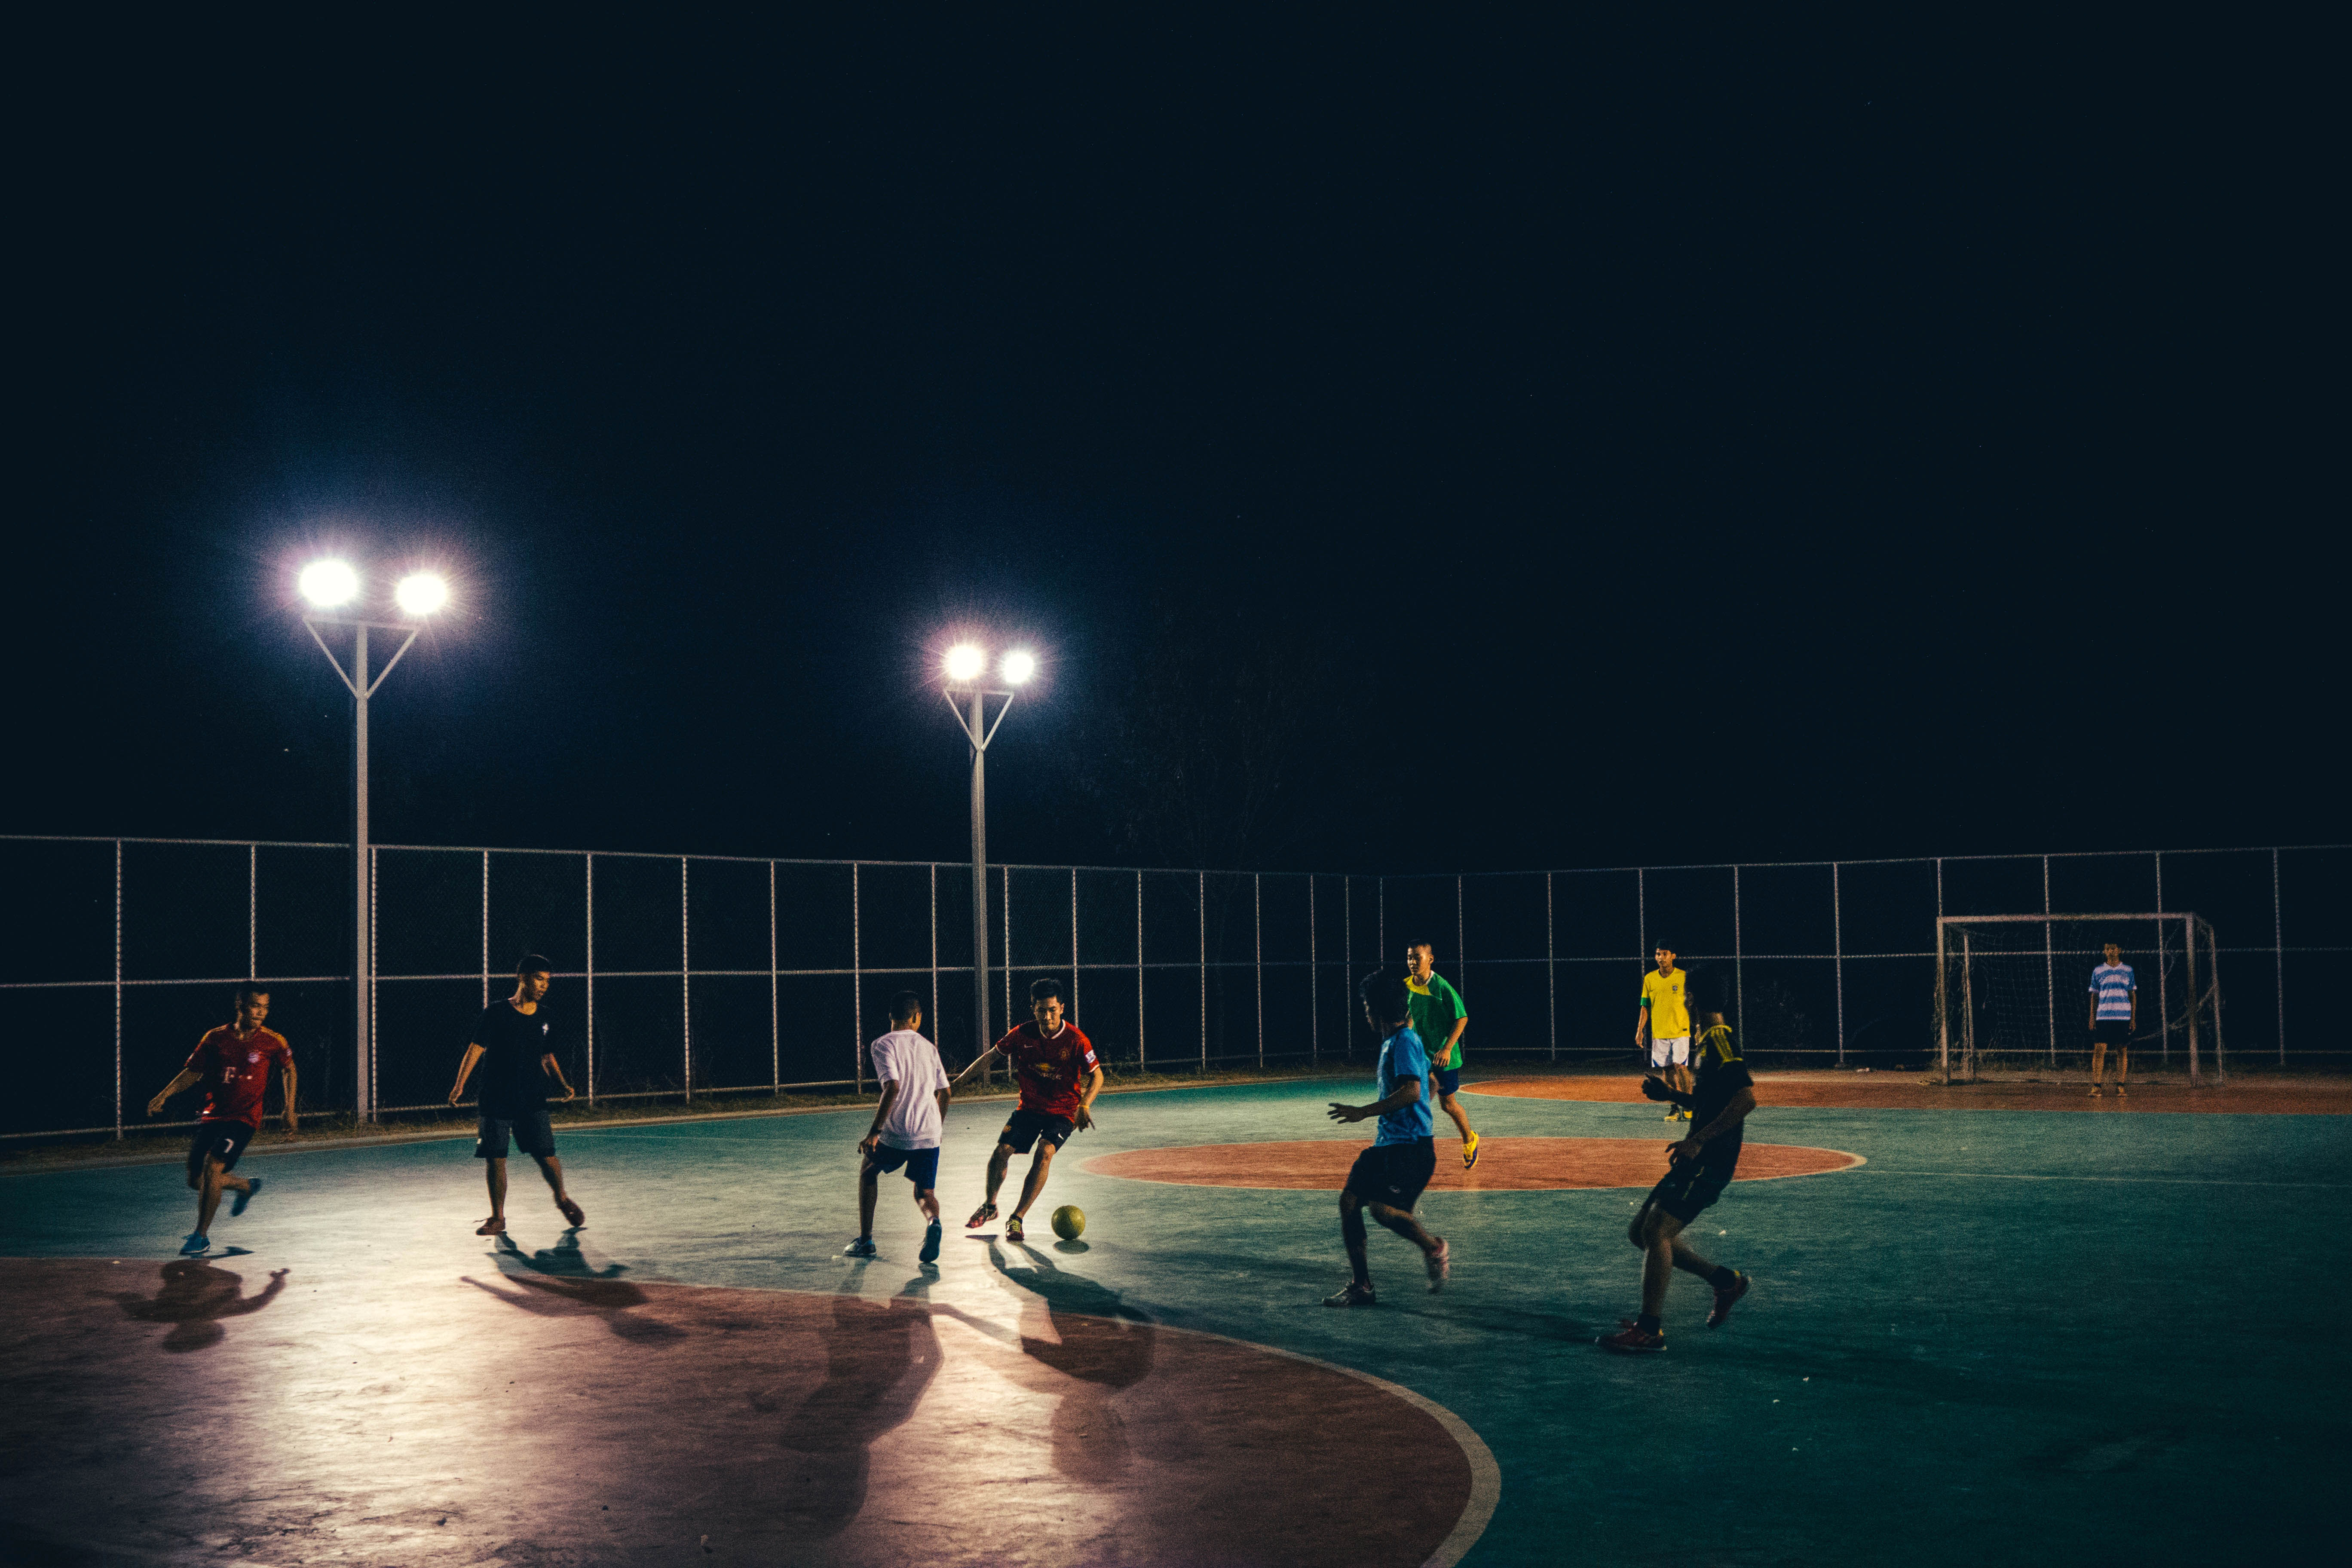 People playing soccer under the streetlamps image - Free stock photo - Public Domain photo - CC0 Images